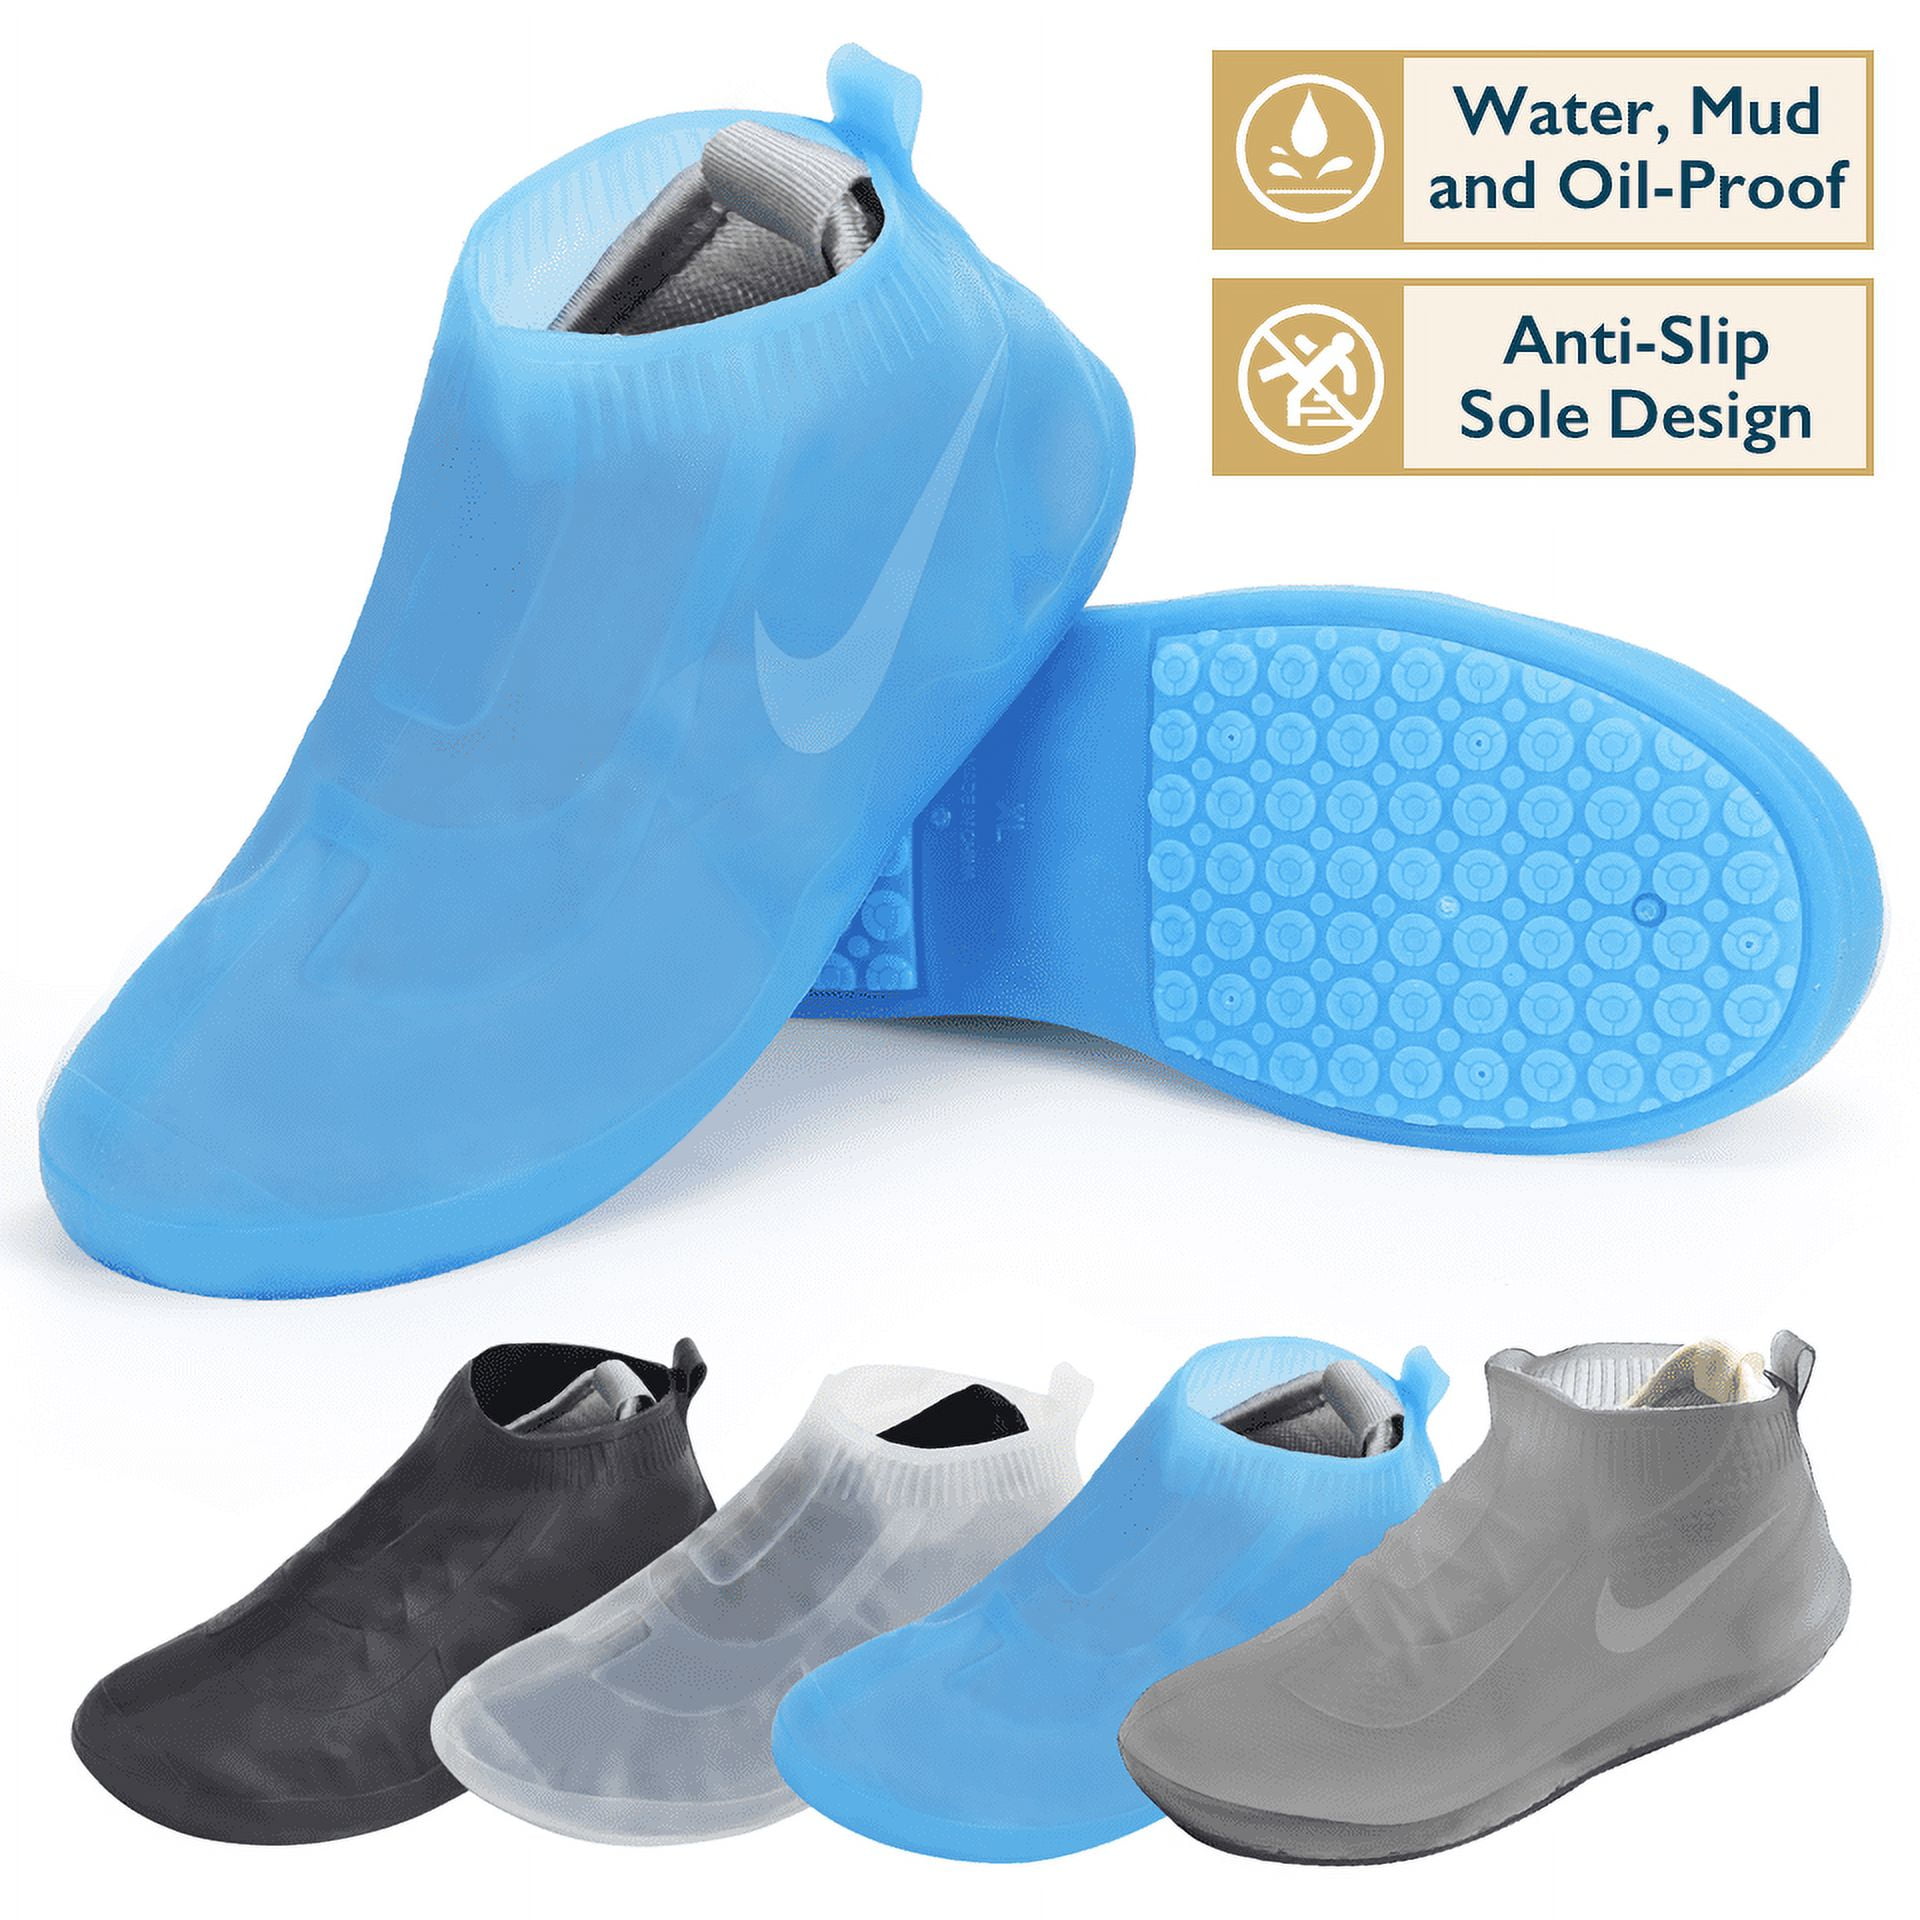 Durui Silicone Waterproof Shoes Cover,Reusable No-Slip Silicone Shoe  Protectors for Kids,Women,Men. white Large